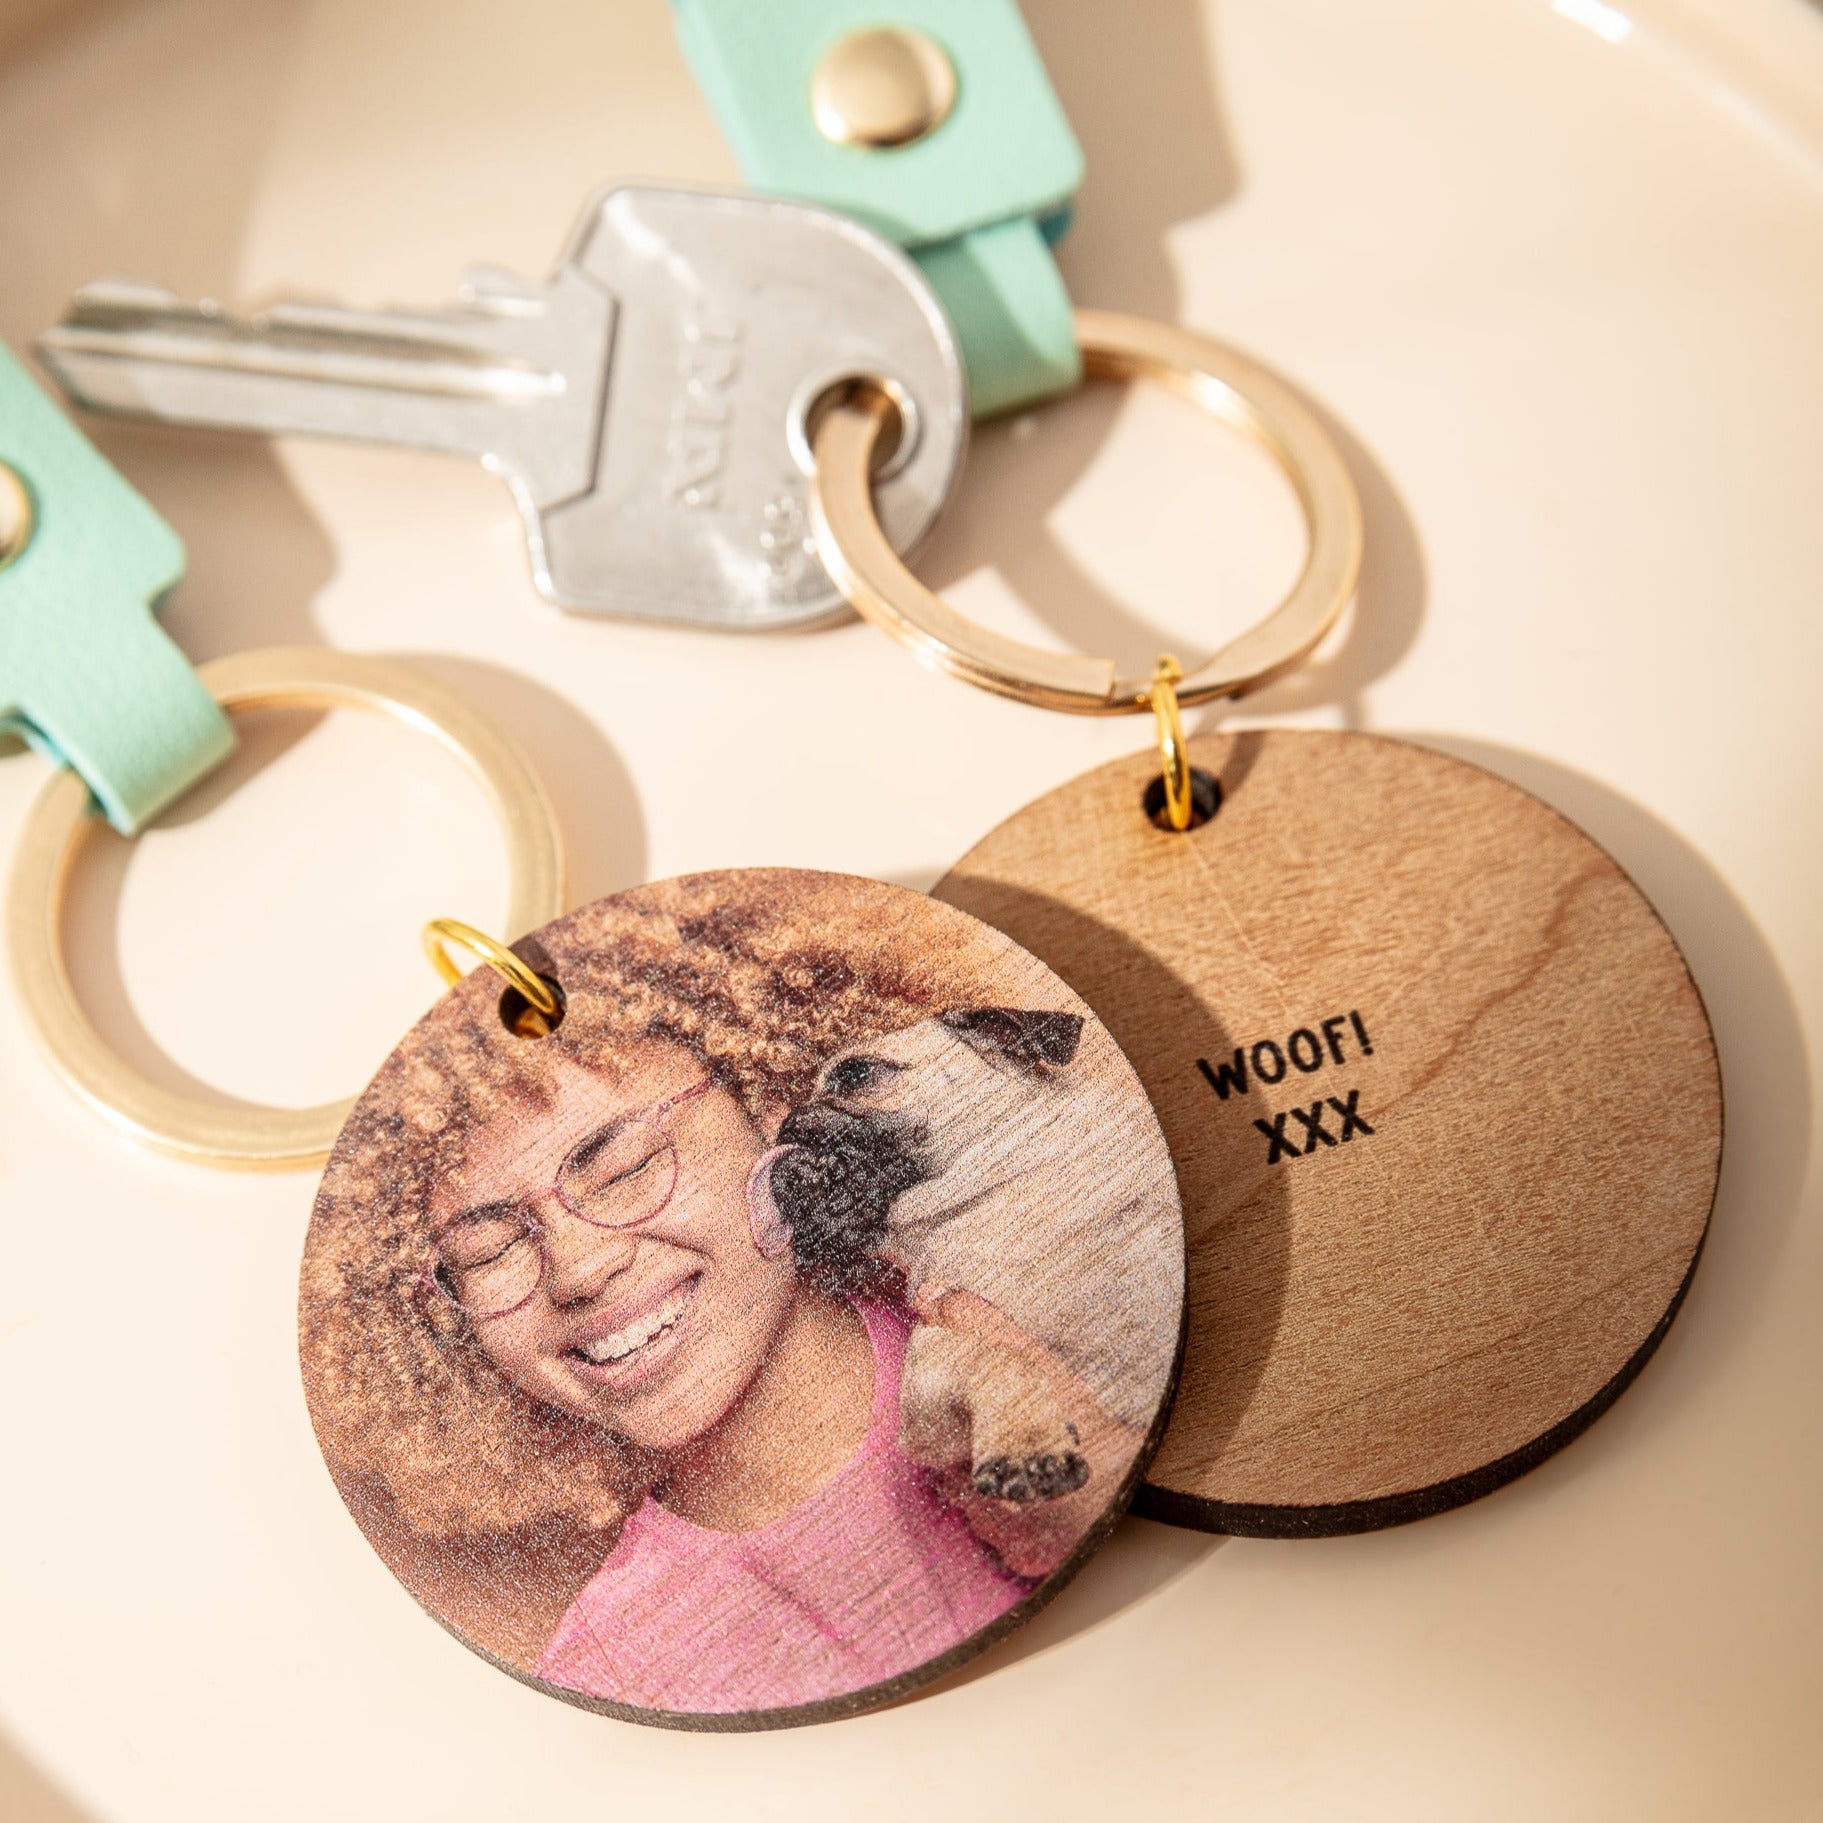 My Favourite Pet Wooden Photograph Keyring With Message